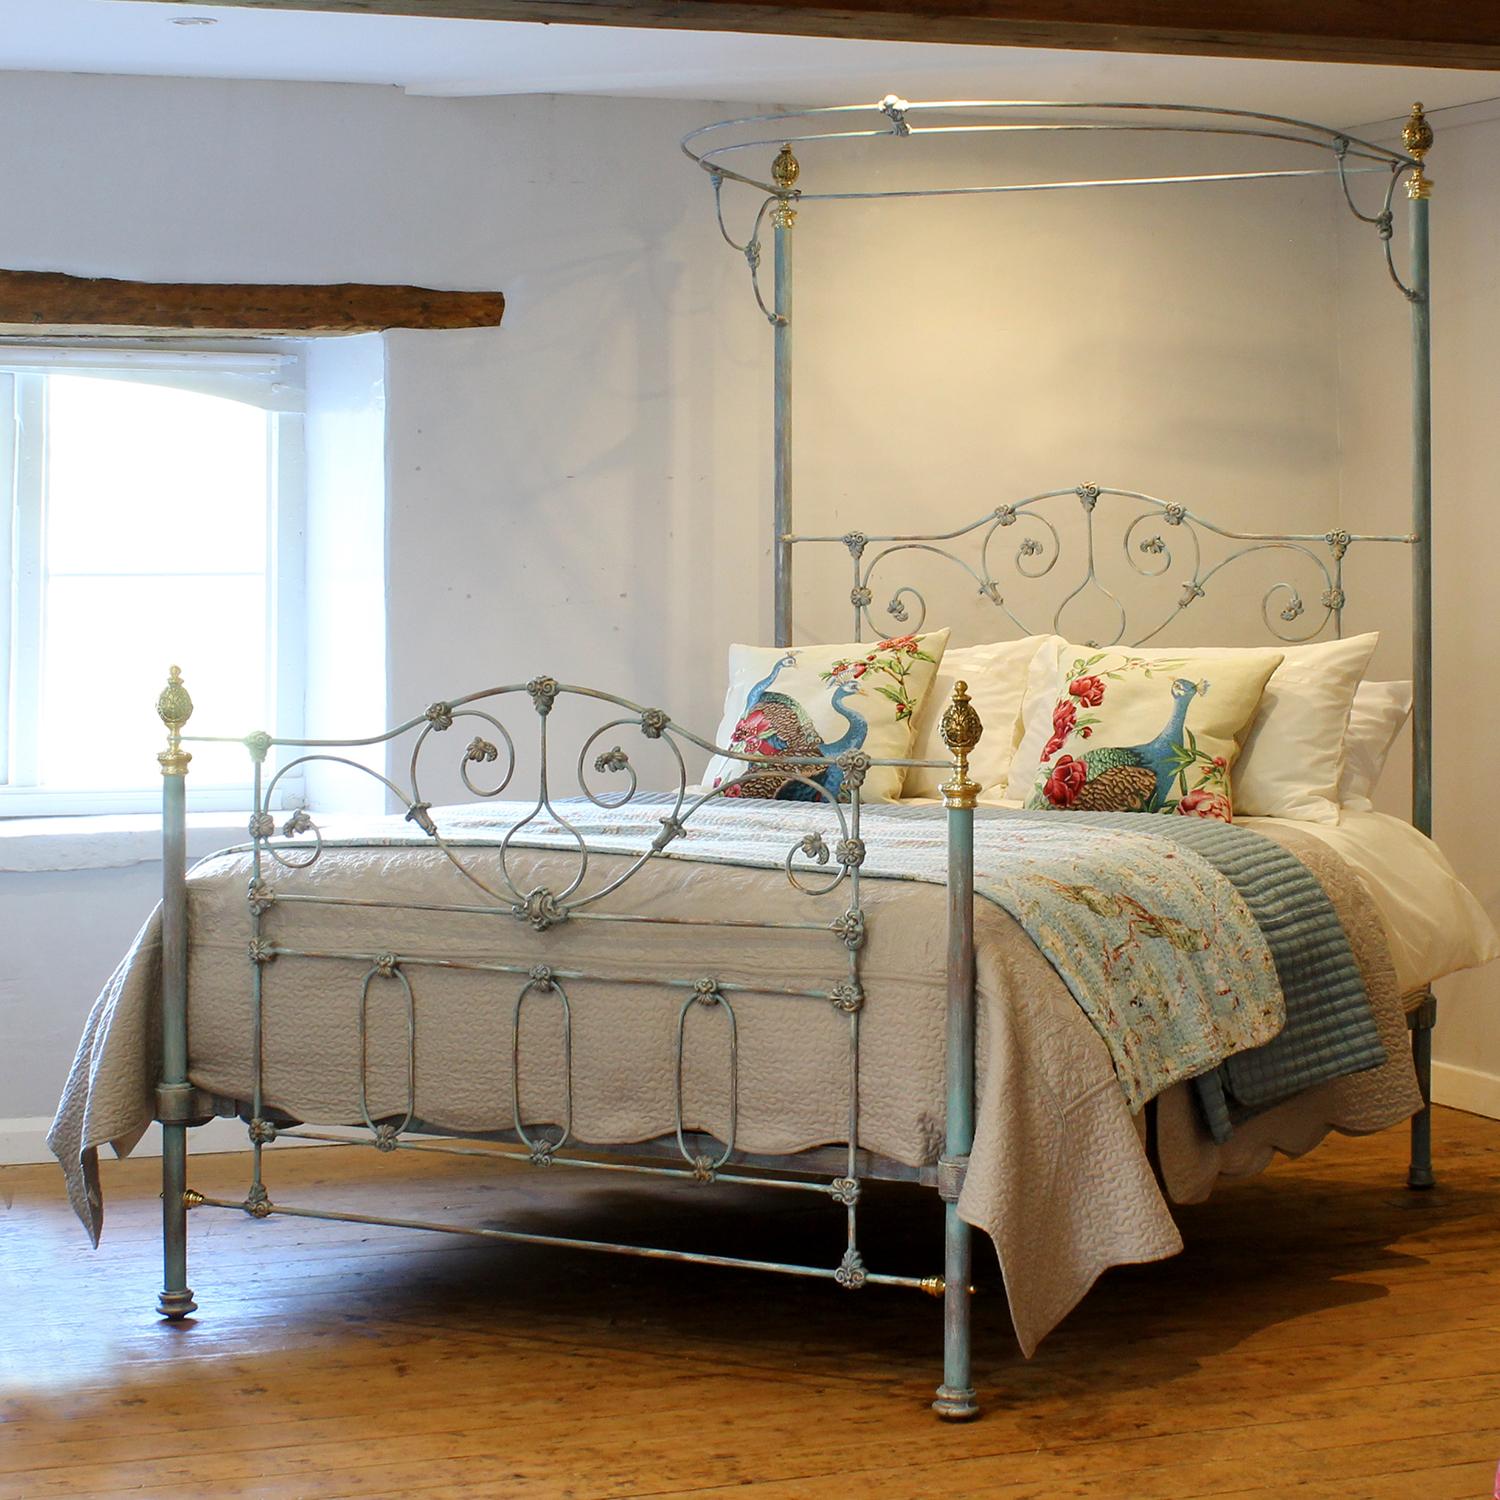 A 5ft wide cast iron antique half tester bed with half-round canopy supported by tall back posts. The attractive castings have been accentuated by the Blue Verdigris finish. 

This bed accepts a British King Size or US Queen Size (5ft or 150cm wide)